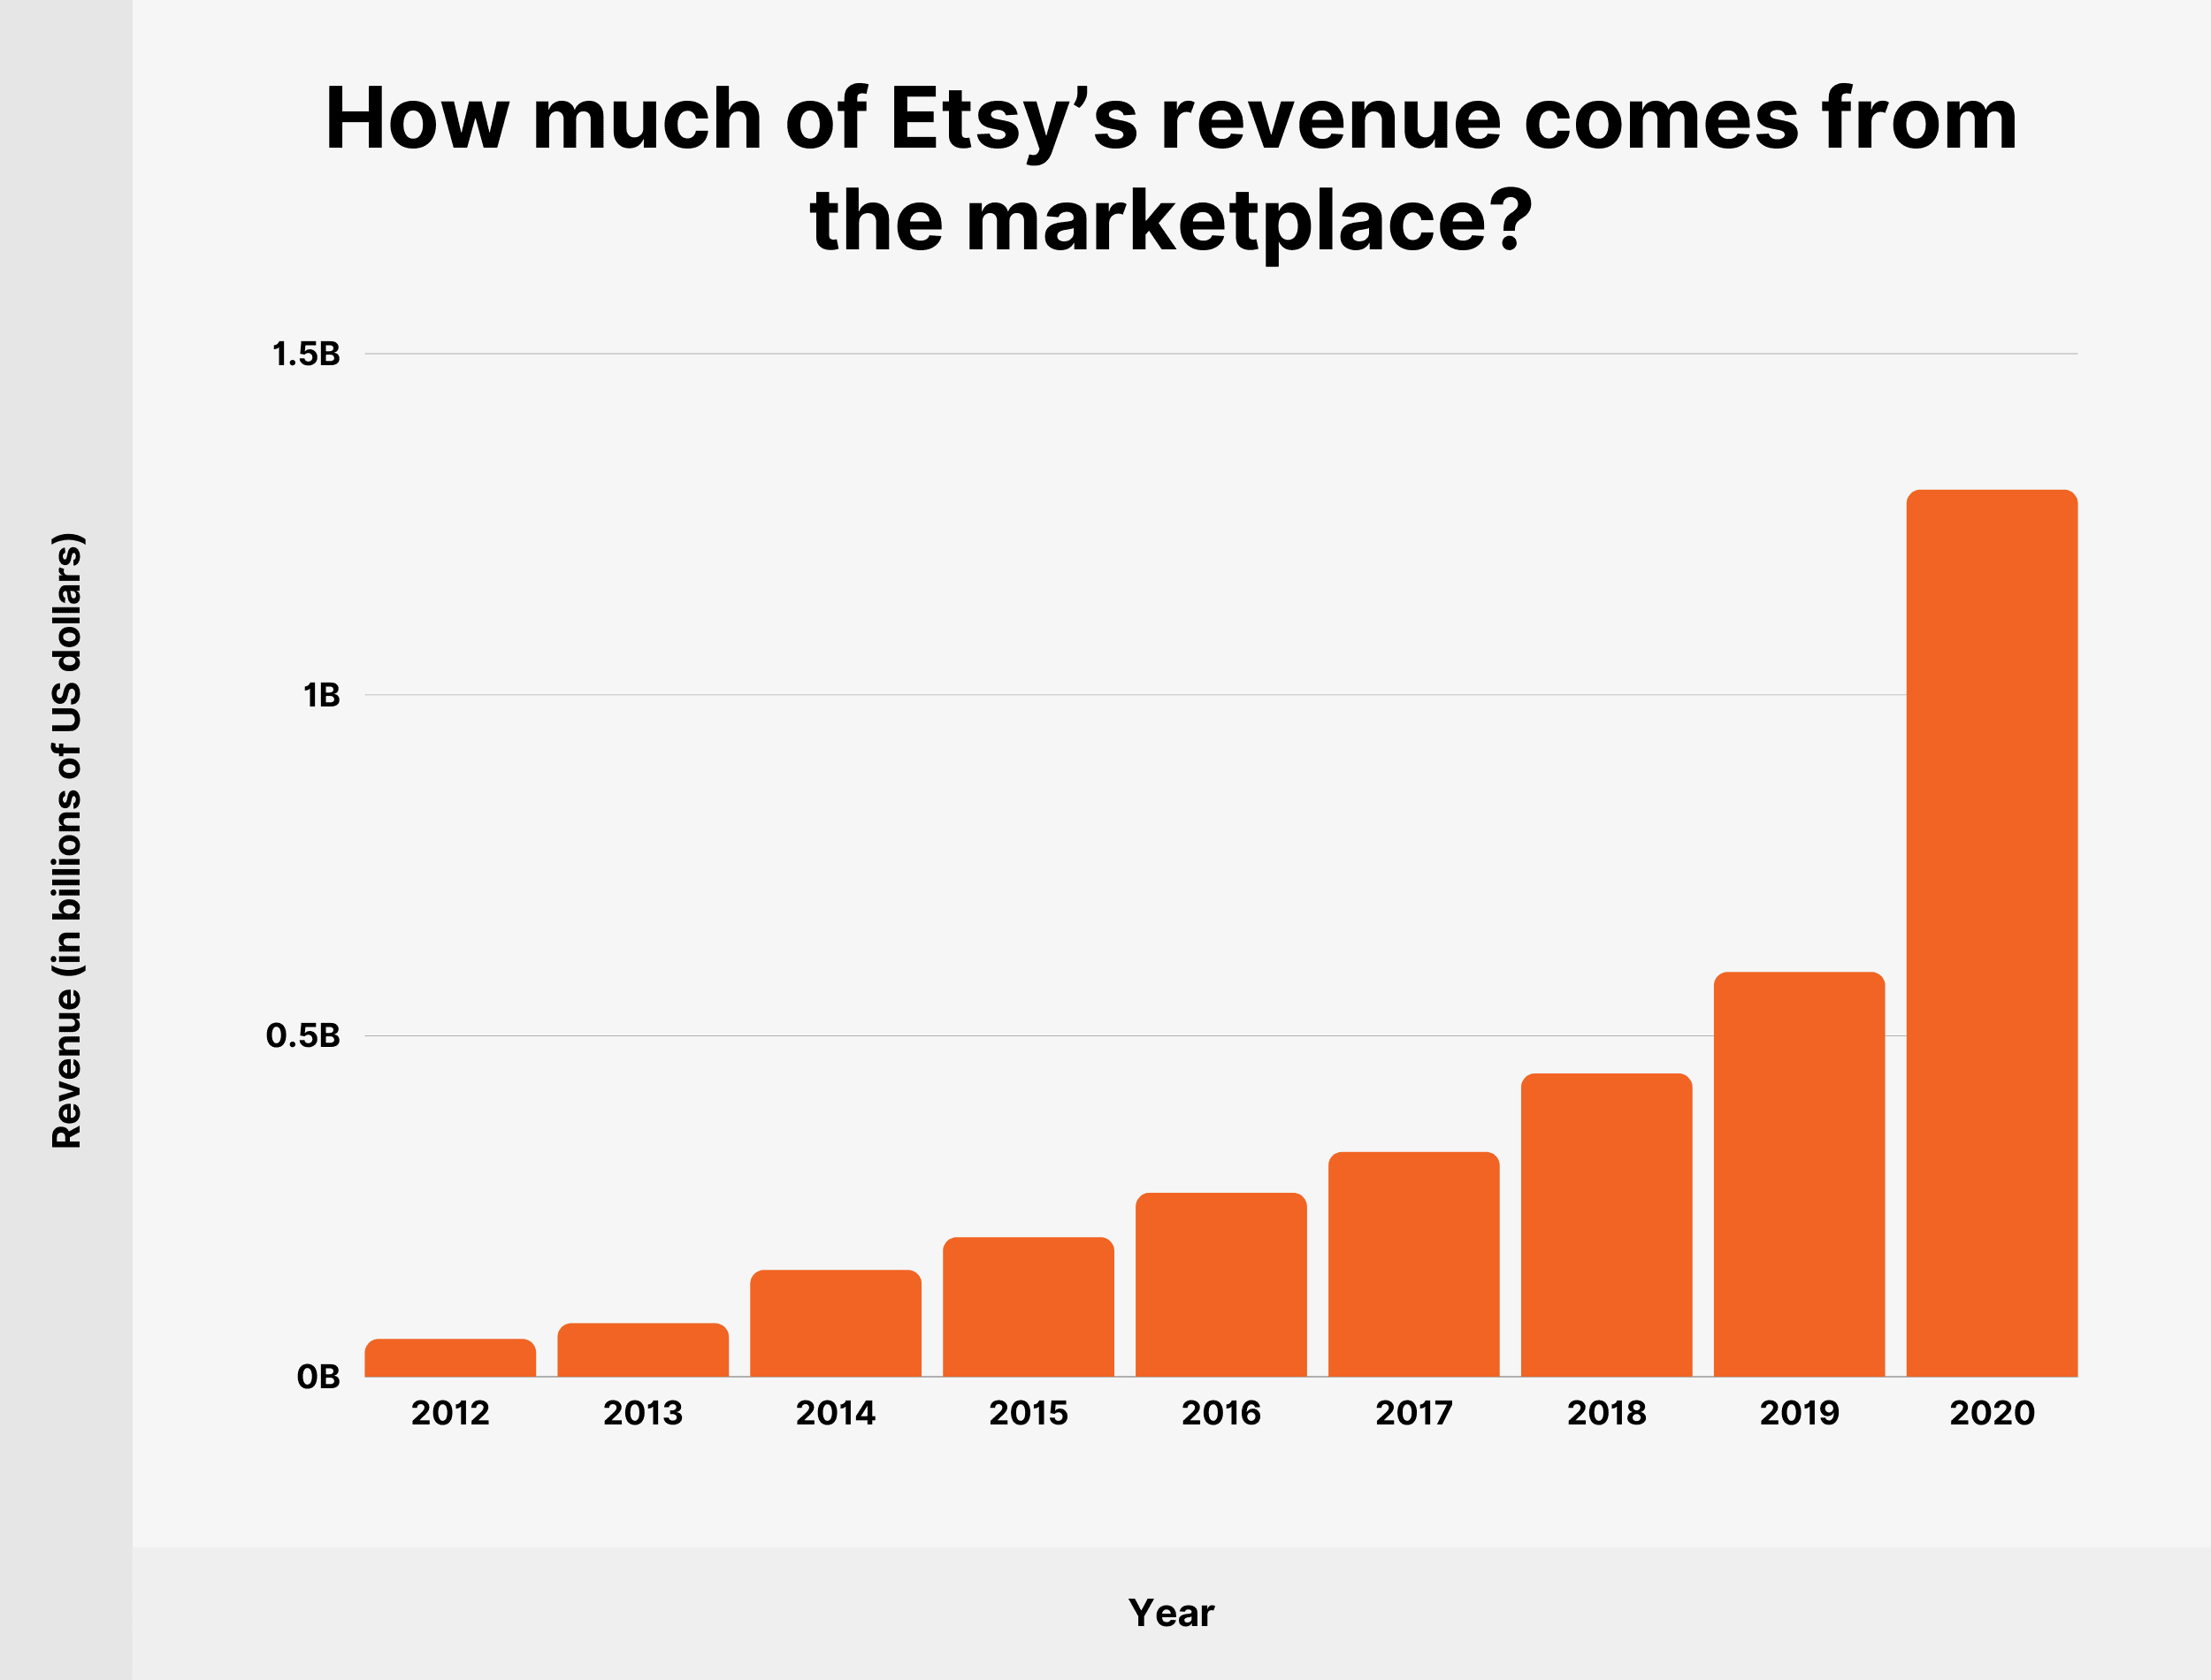 How much of Etsy’s revenue comes from the marketplace?